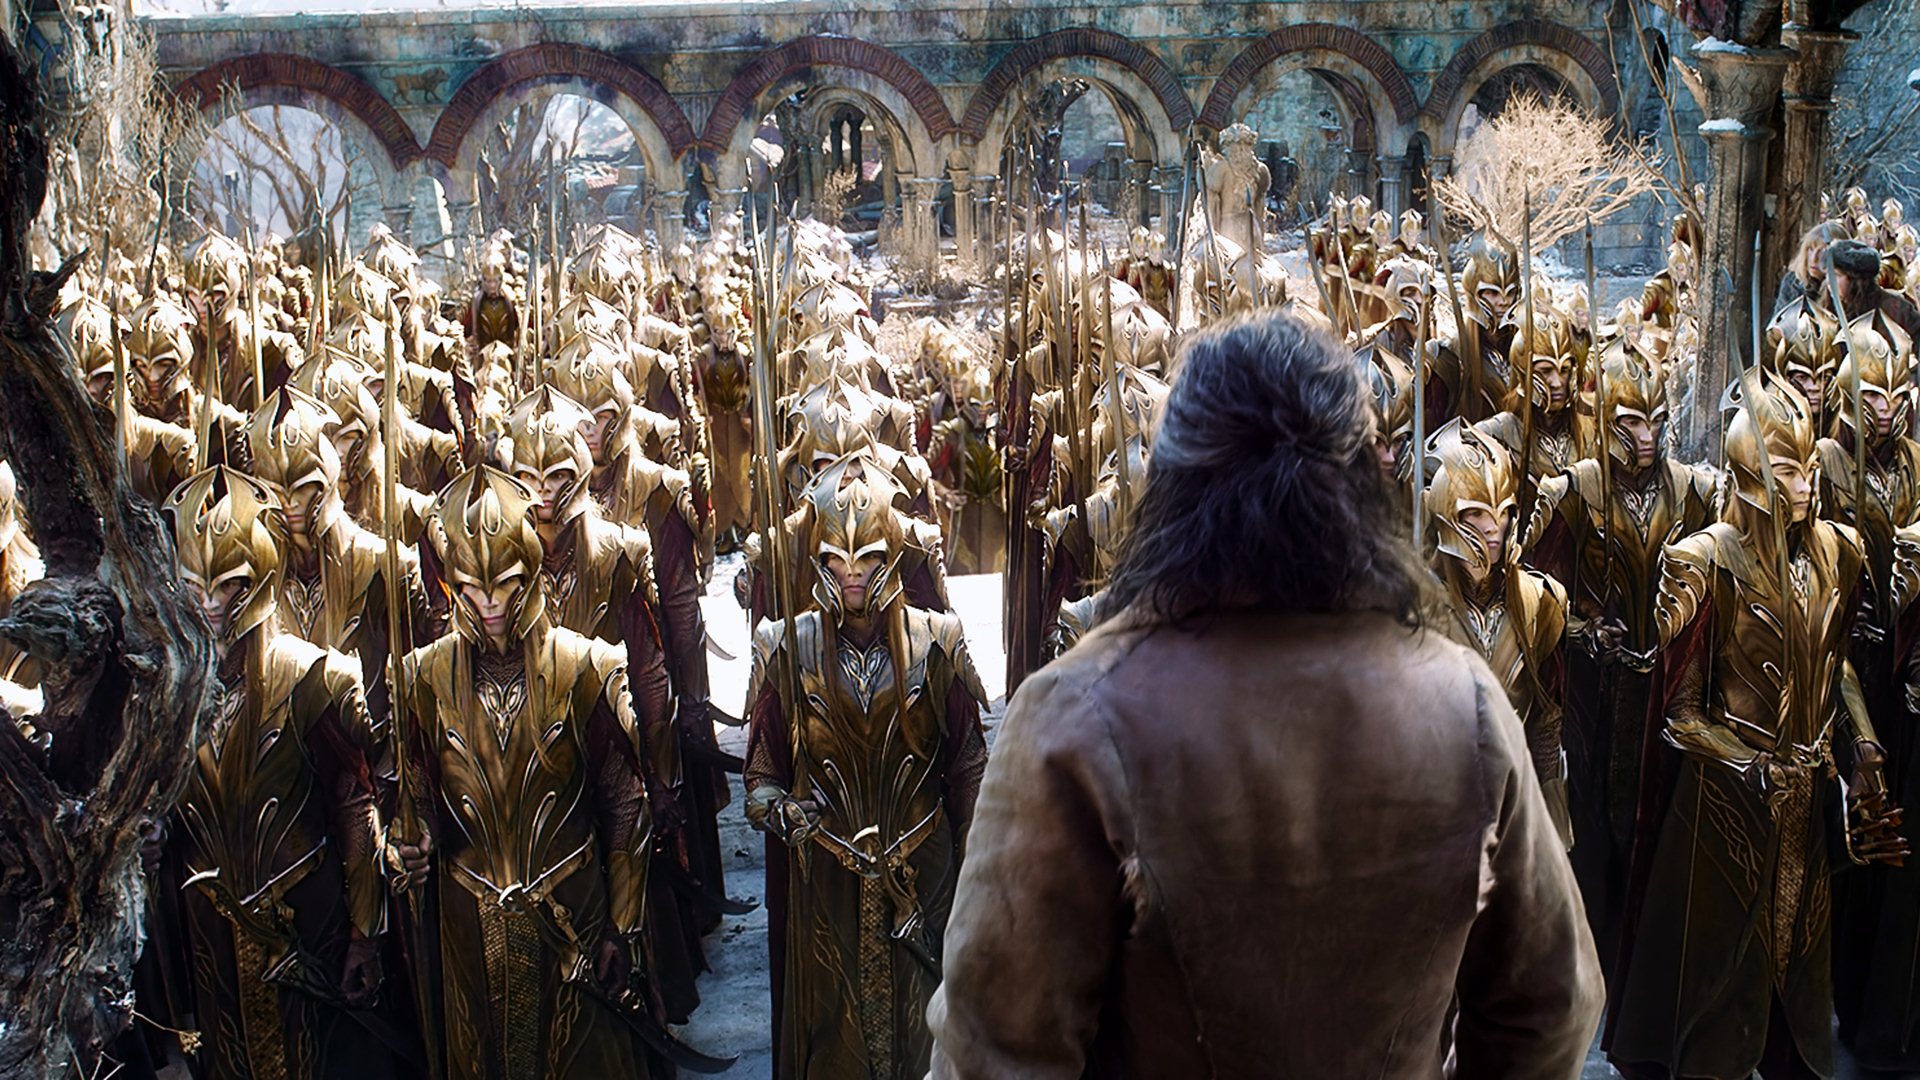 Podcast: The Hobbit 3, Top 3 Moments from Middle Earth – Episode 96